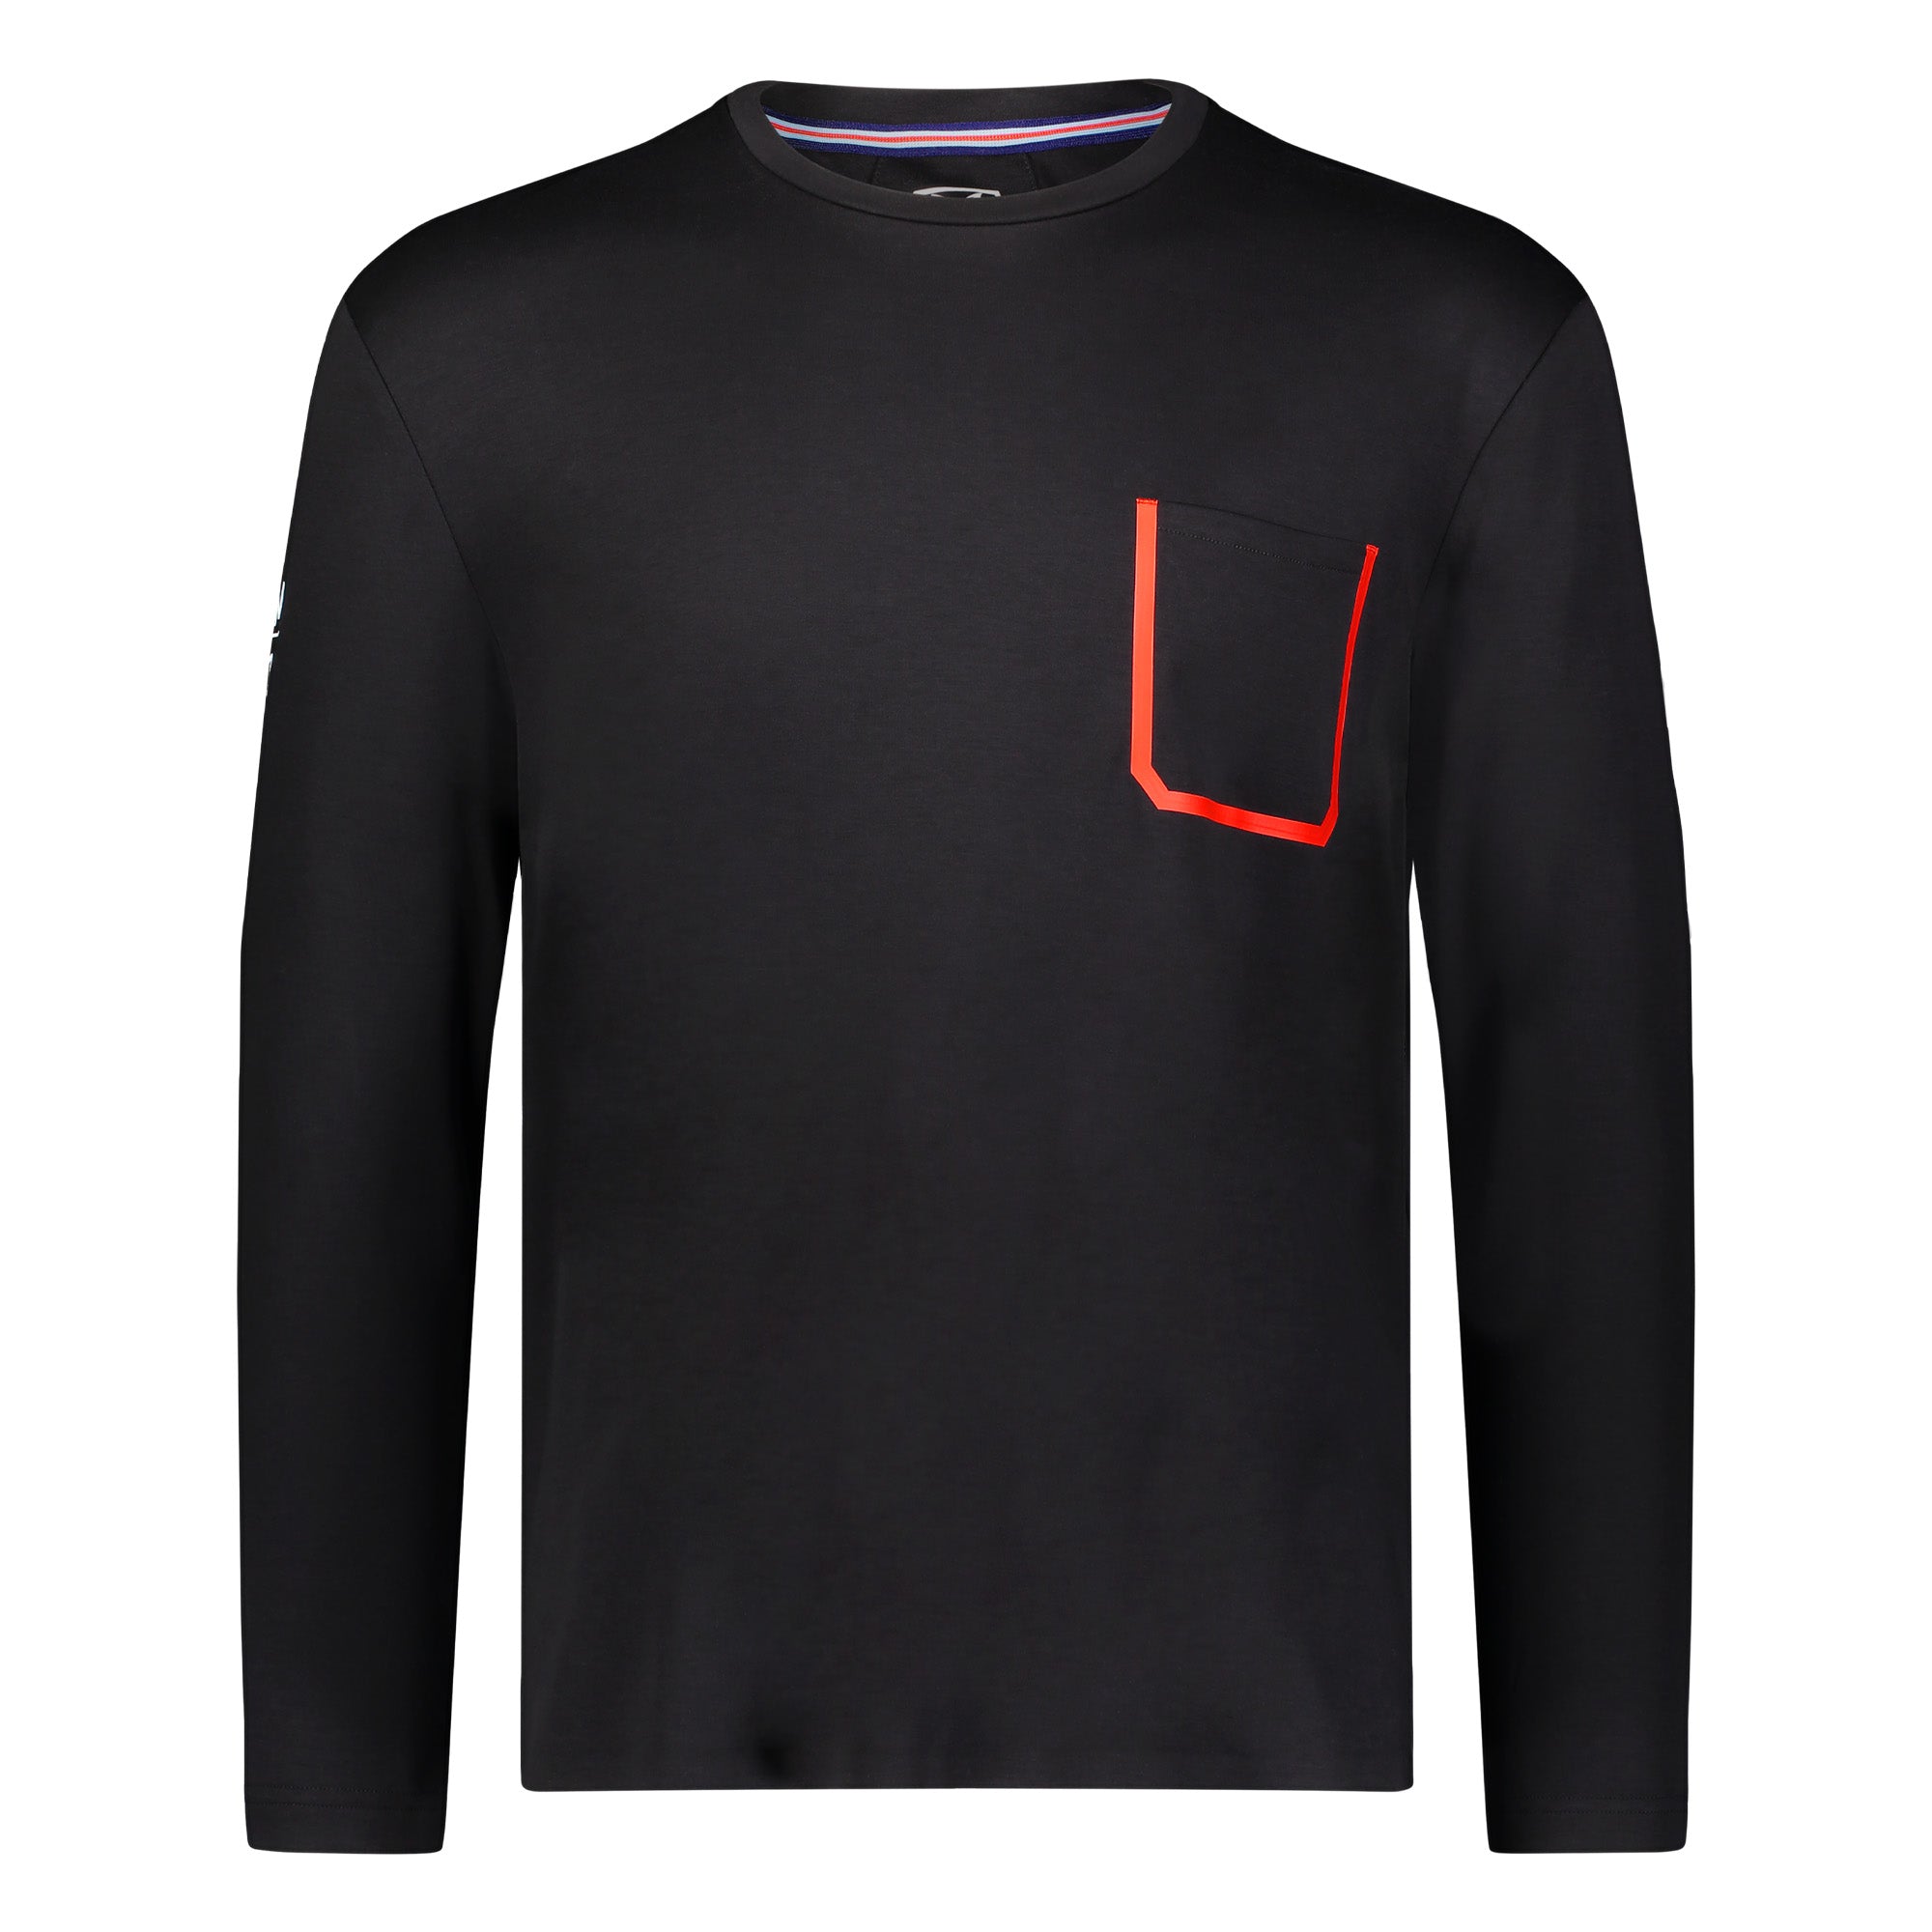 Lv Made The Lionel Messi shirt, hoodie, sweater, long sleeve and